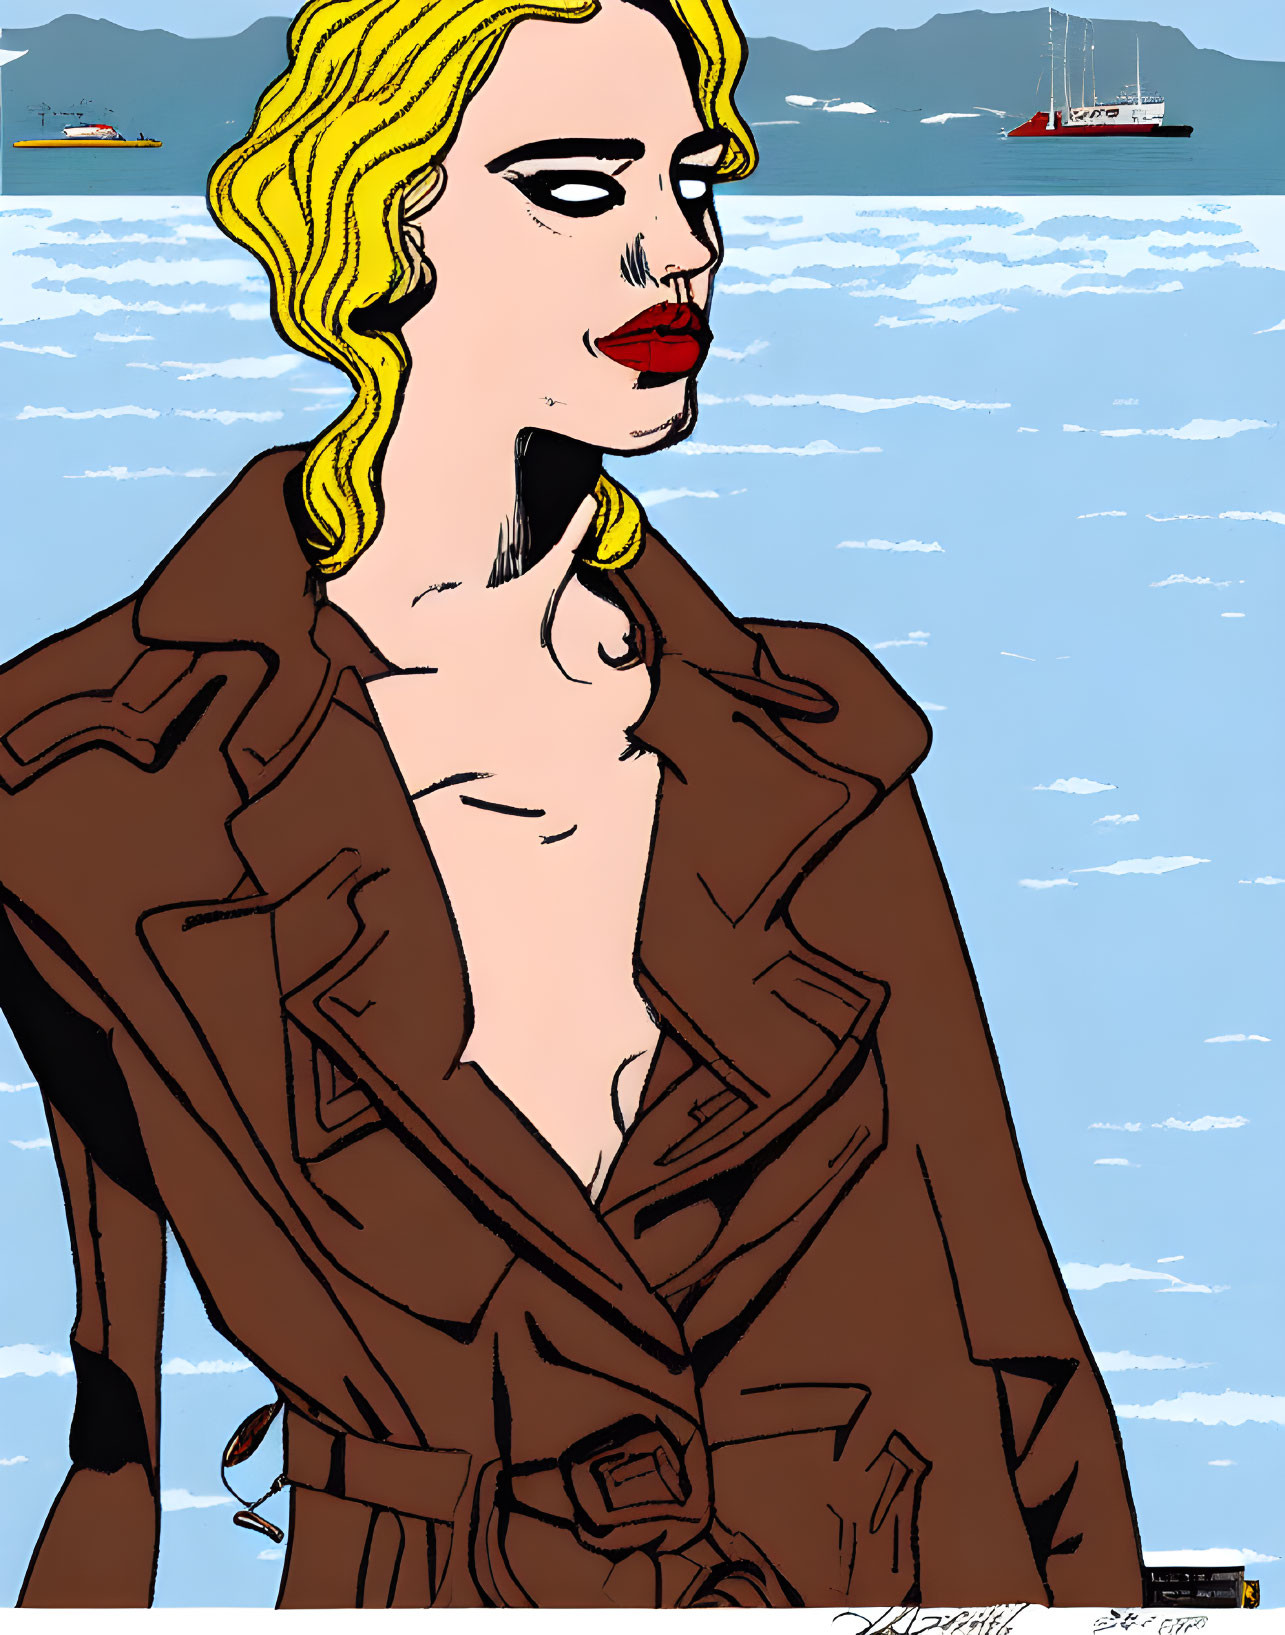 character in a scenic environment by Deborah Azzop